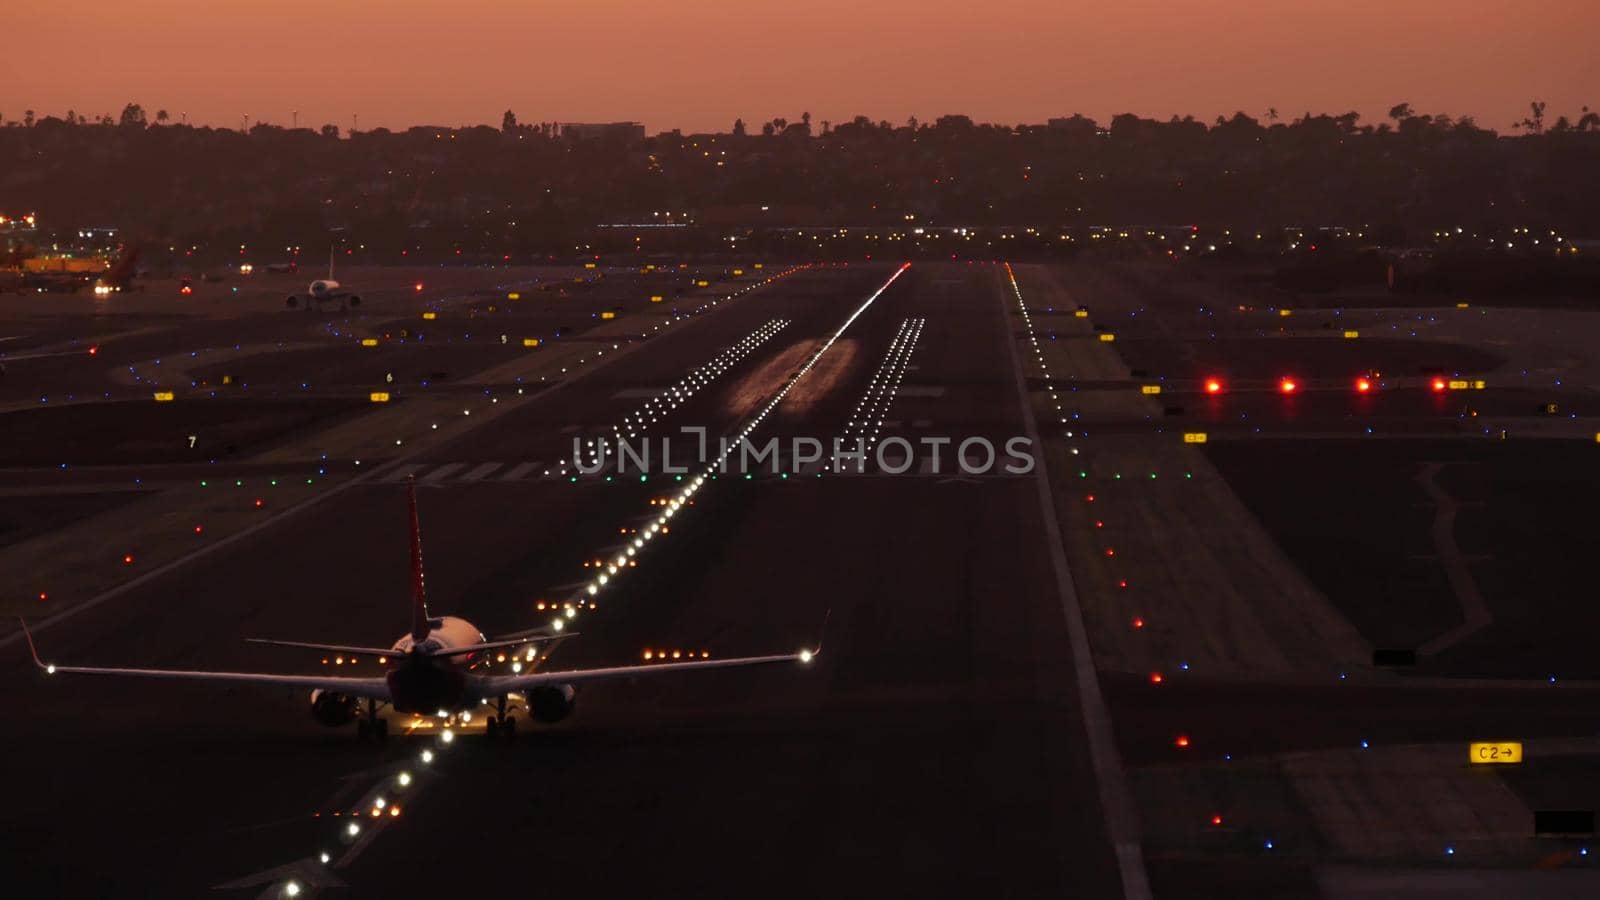 Airport runway lights at night, plane or airplane taking off from airstrip, twilight dusk after sunset. Aircraft or airliner jet departure from aerodrome, San Diego airfield in evening, California USA